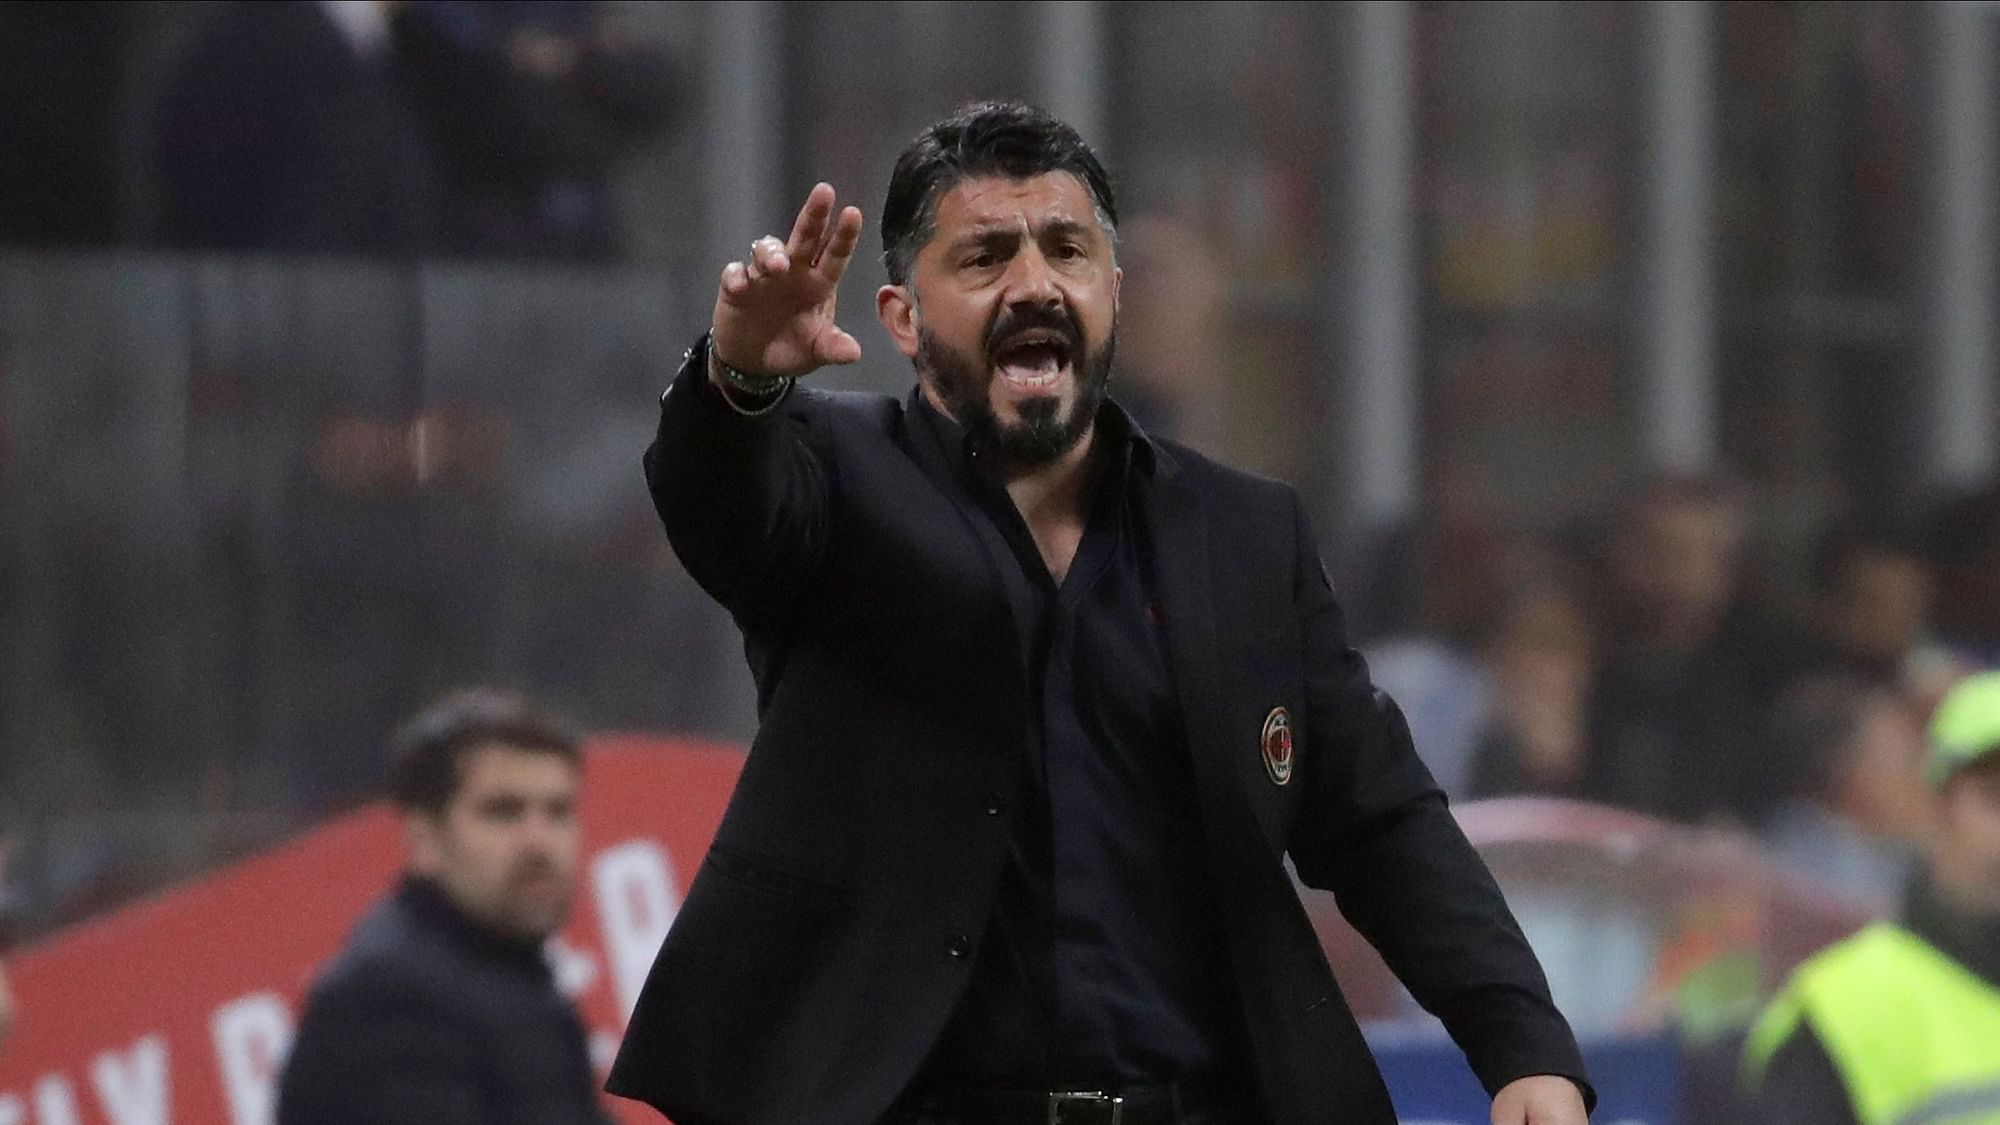 AC Milan coach Gennaro Gattuso shouts out from the touchline during a Serie A  match between AC Milan and Inter Milan at the San Siro stadium in Milan, Italy.&nbsp;